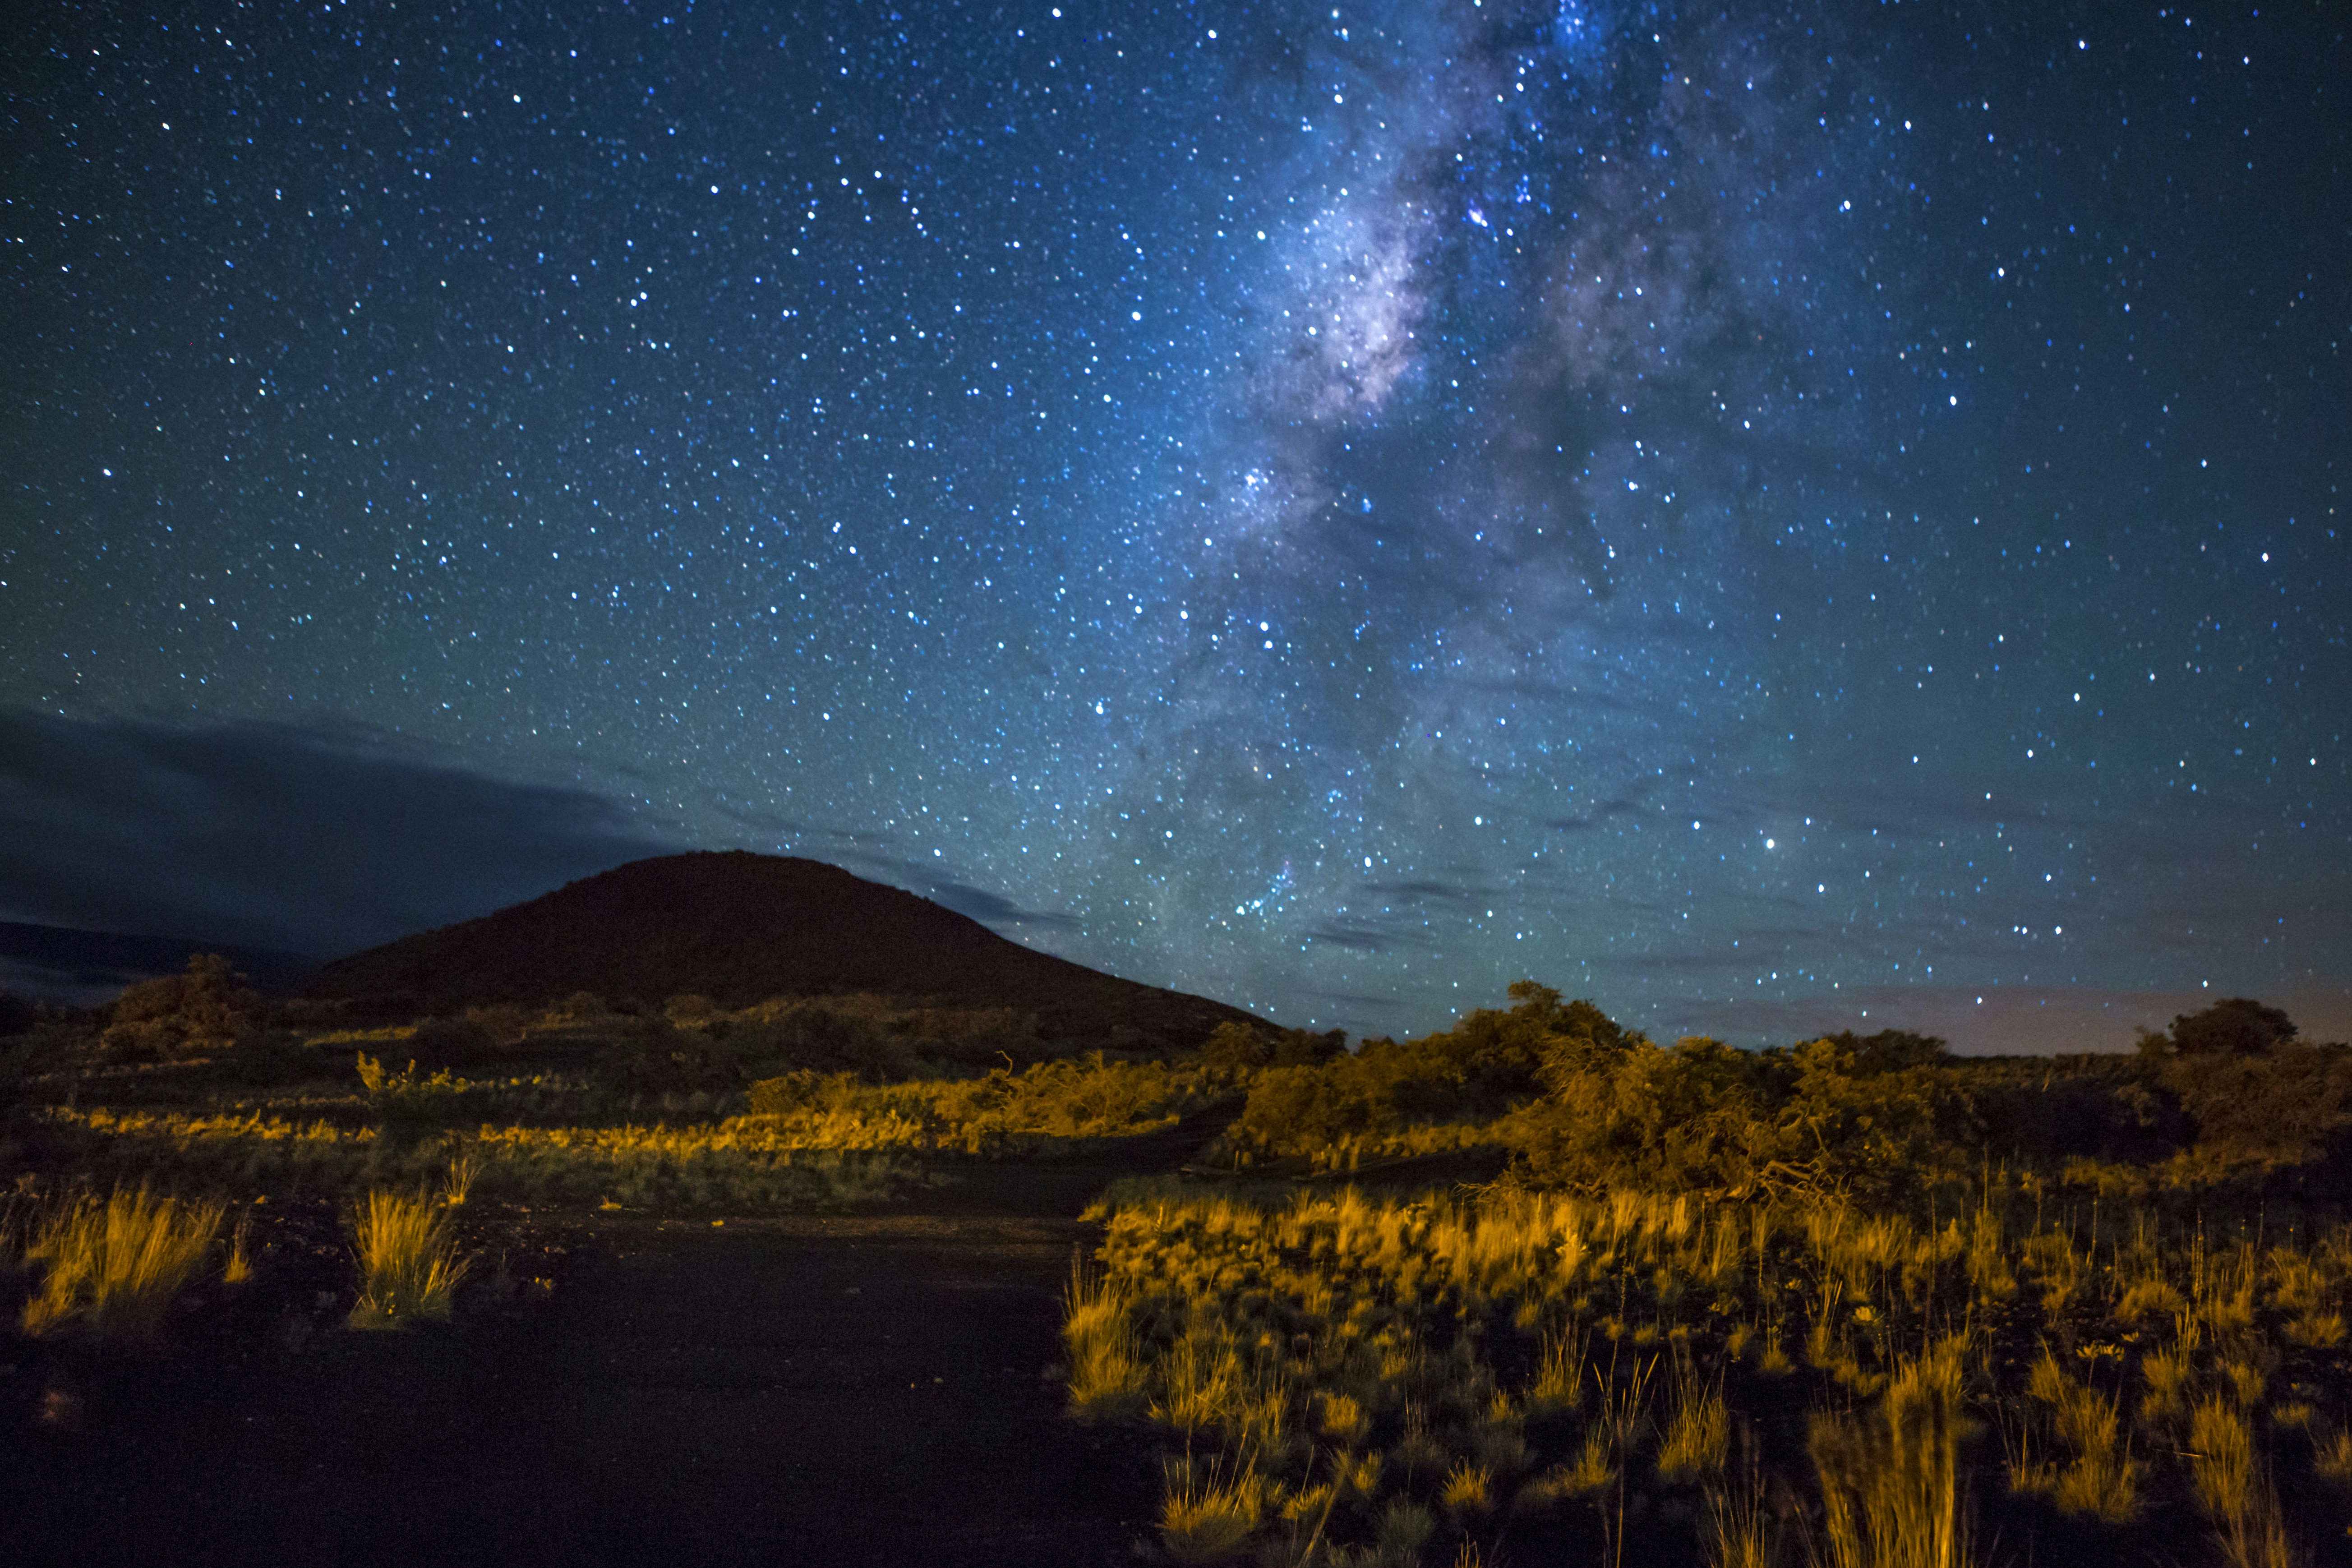 The Milky Way appears in the sky over the Hawaiian landscape, with Mauna Kea's shadow in the background